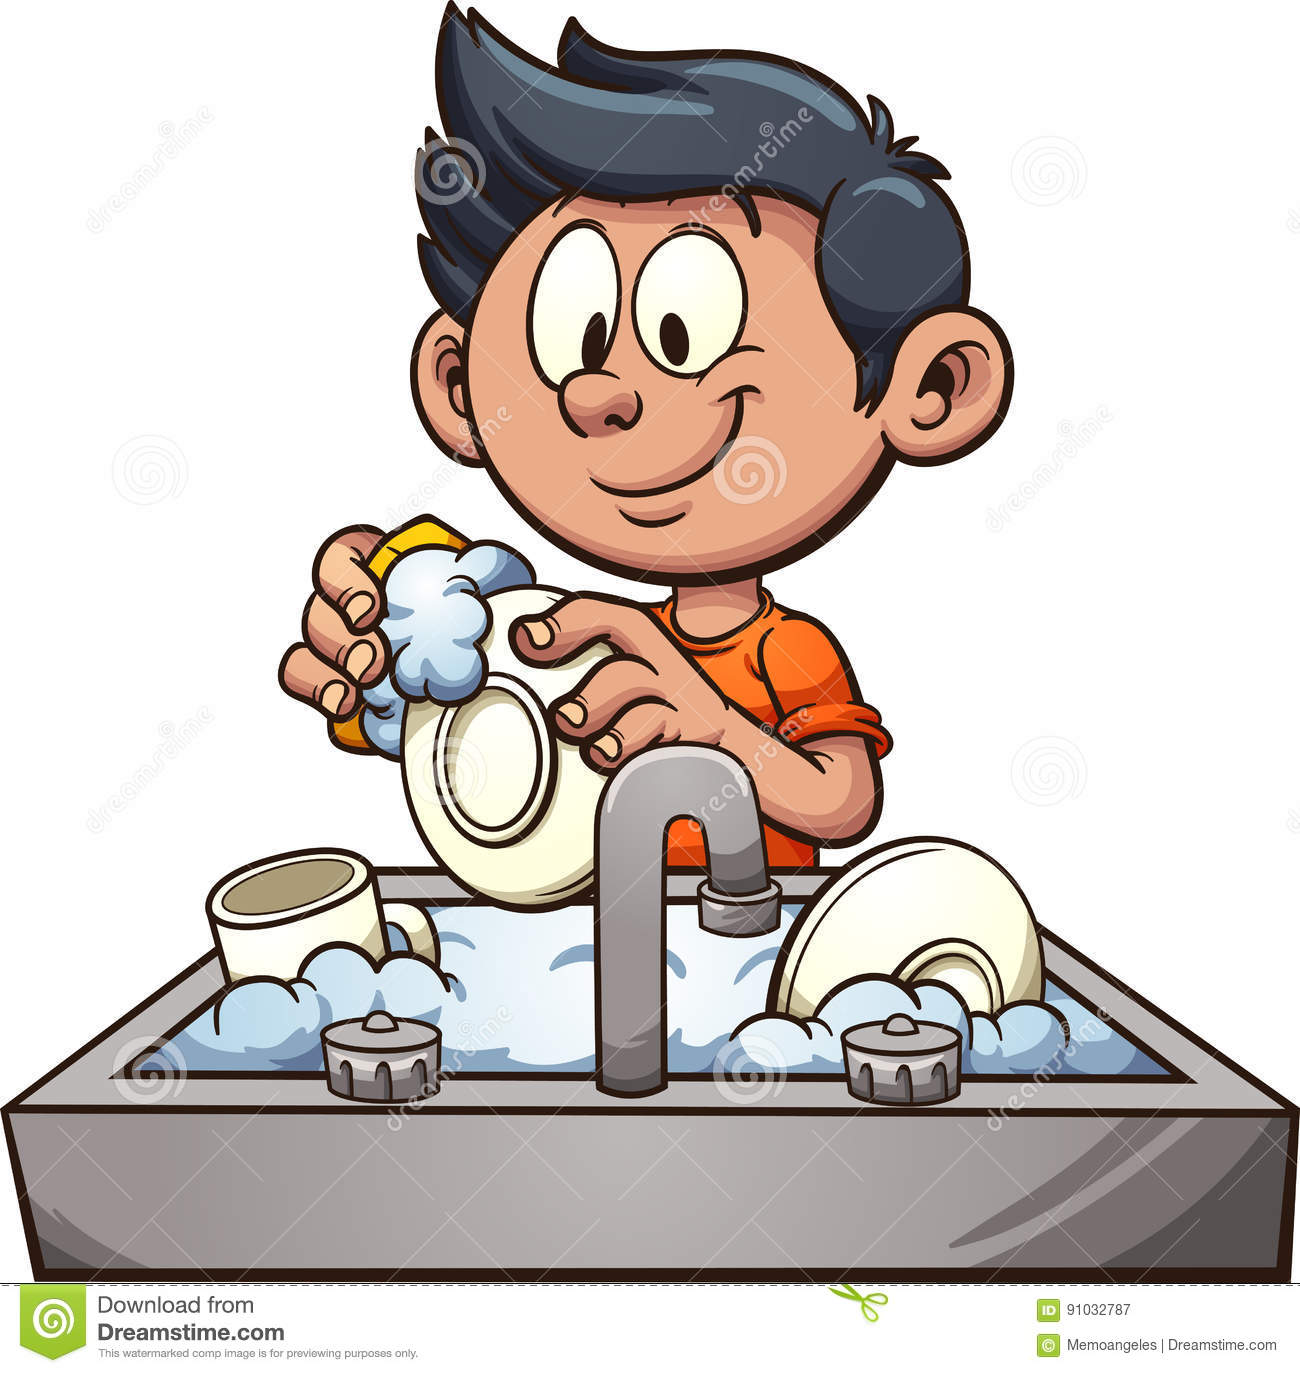 Wash Dishes Clipart.